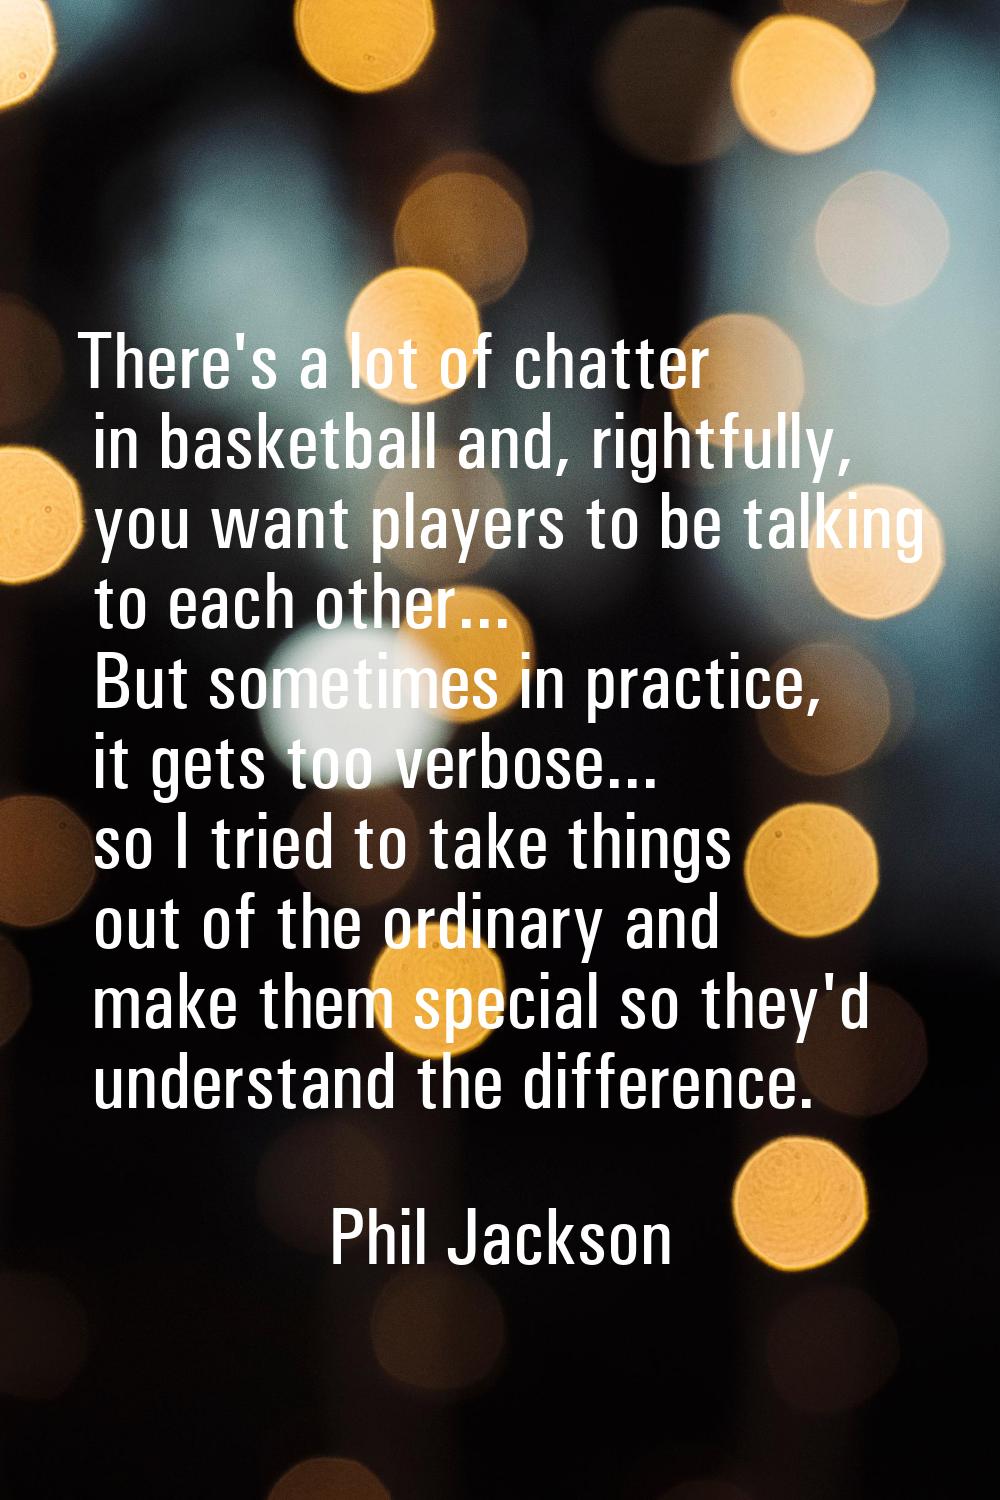 There's a lot of chatter in basketball and, rightfully, you want players to be talking to each othe